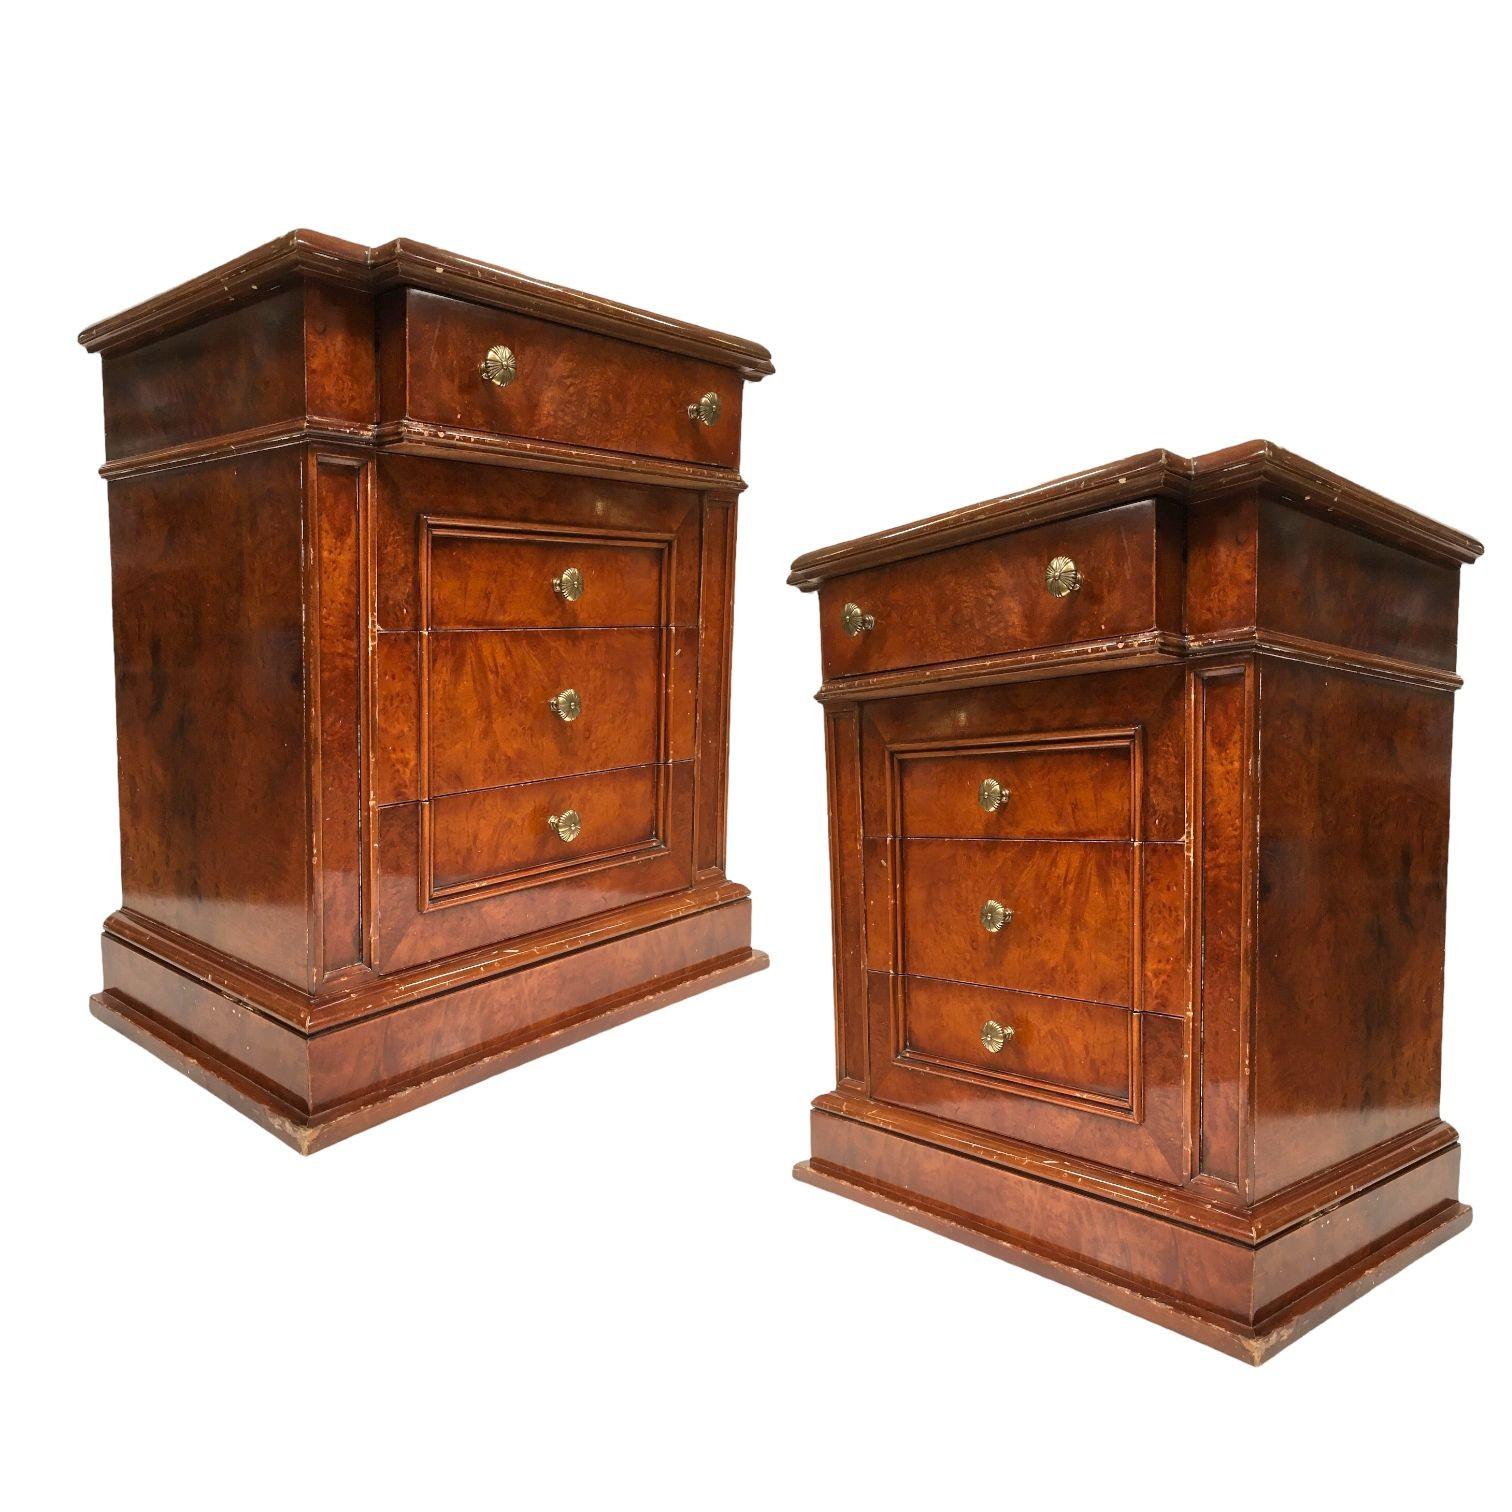 Vintage solid maple wood nightstands with 4 drawers each. Set of 2. 1,200
 
This pair of nightstands are made to last. Solid wood makes for a sturdy piece. Each piece has 4 drawers, comes with solid brass knobs, and features a beautiful natural